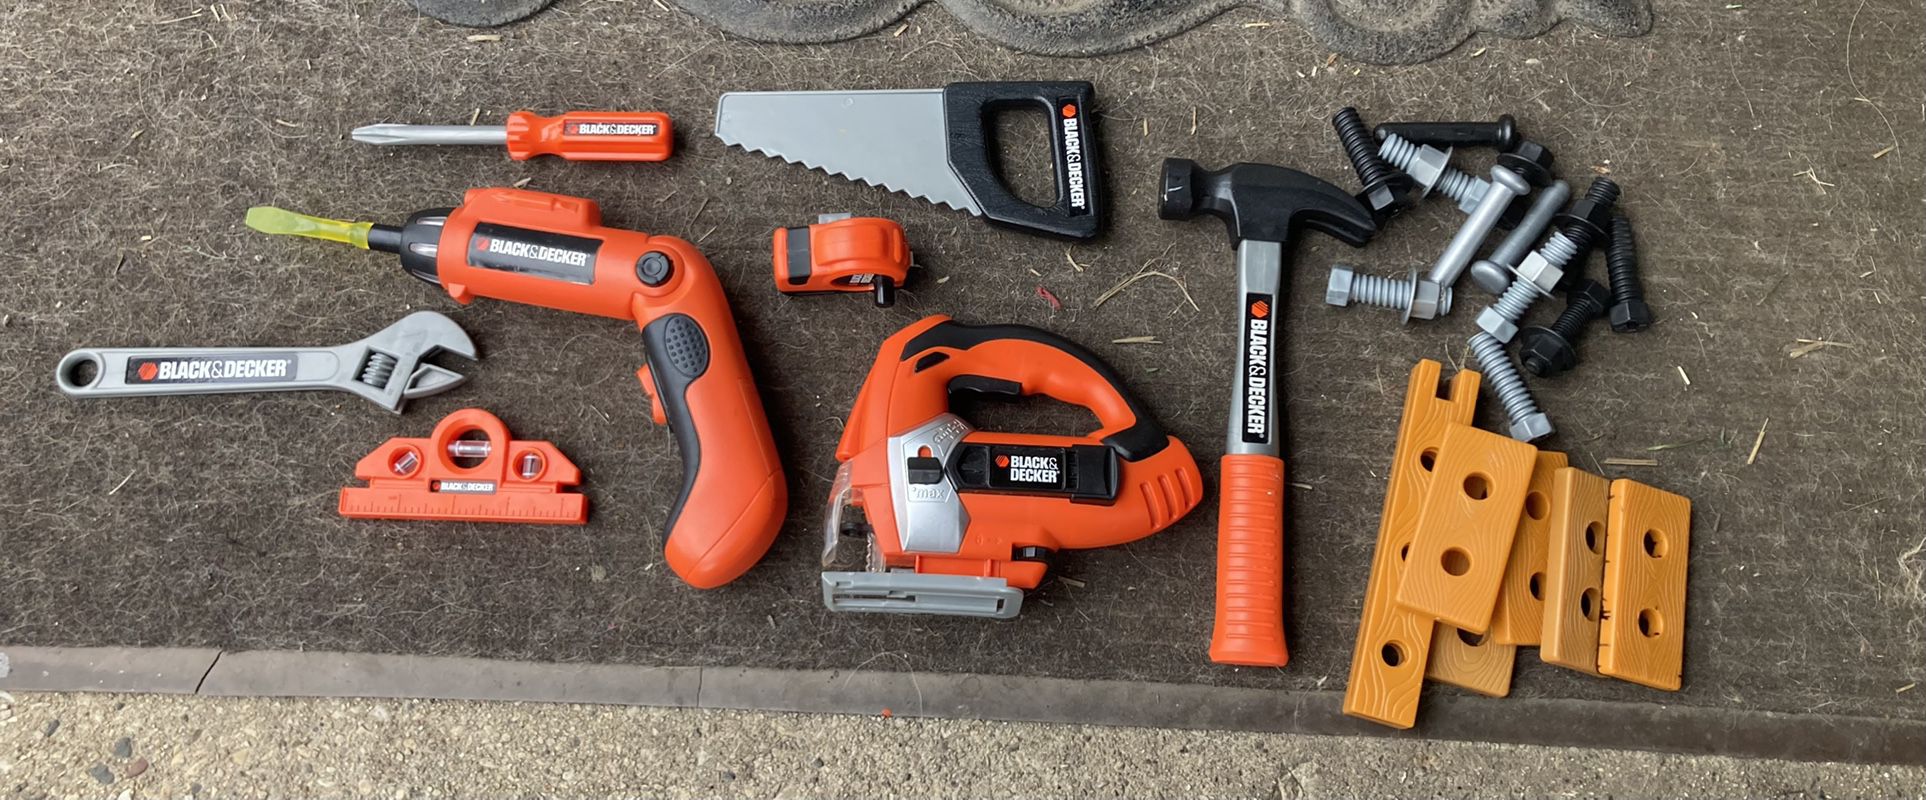 BLACK AND DECKER WORK BENCH - The Toy Insider